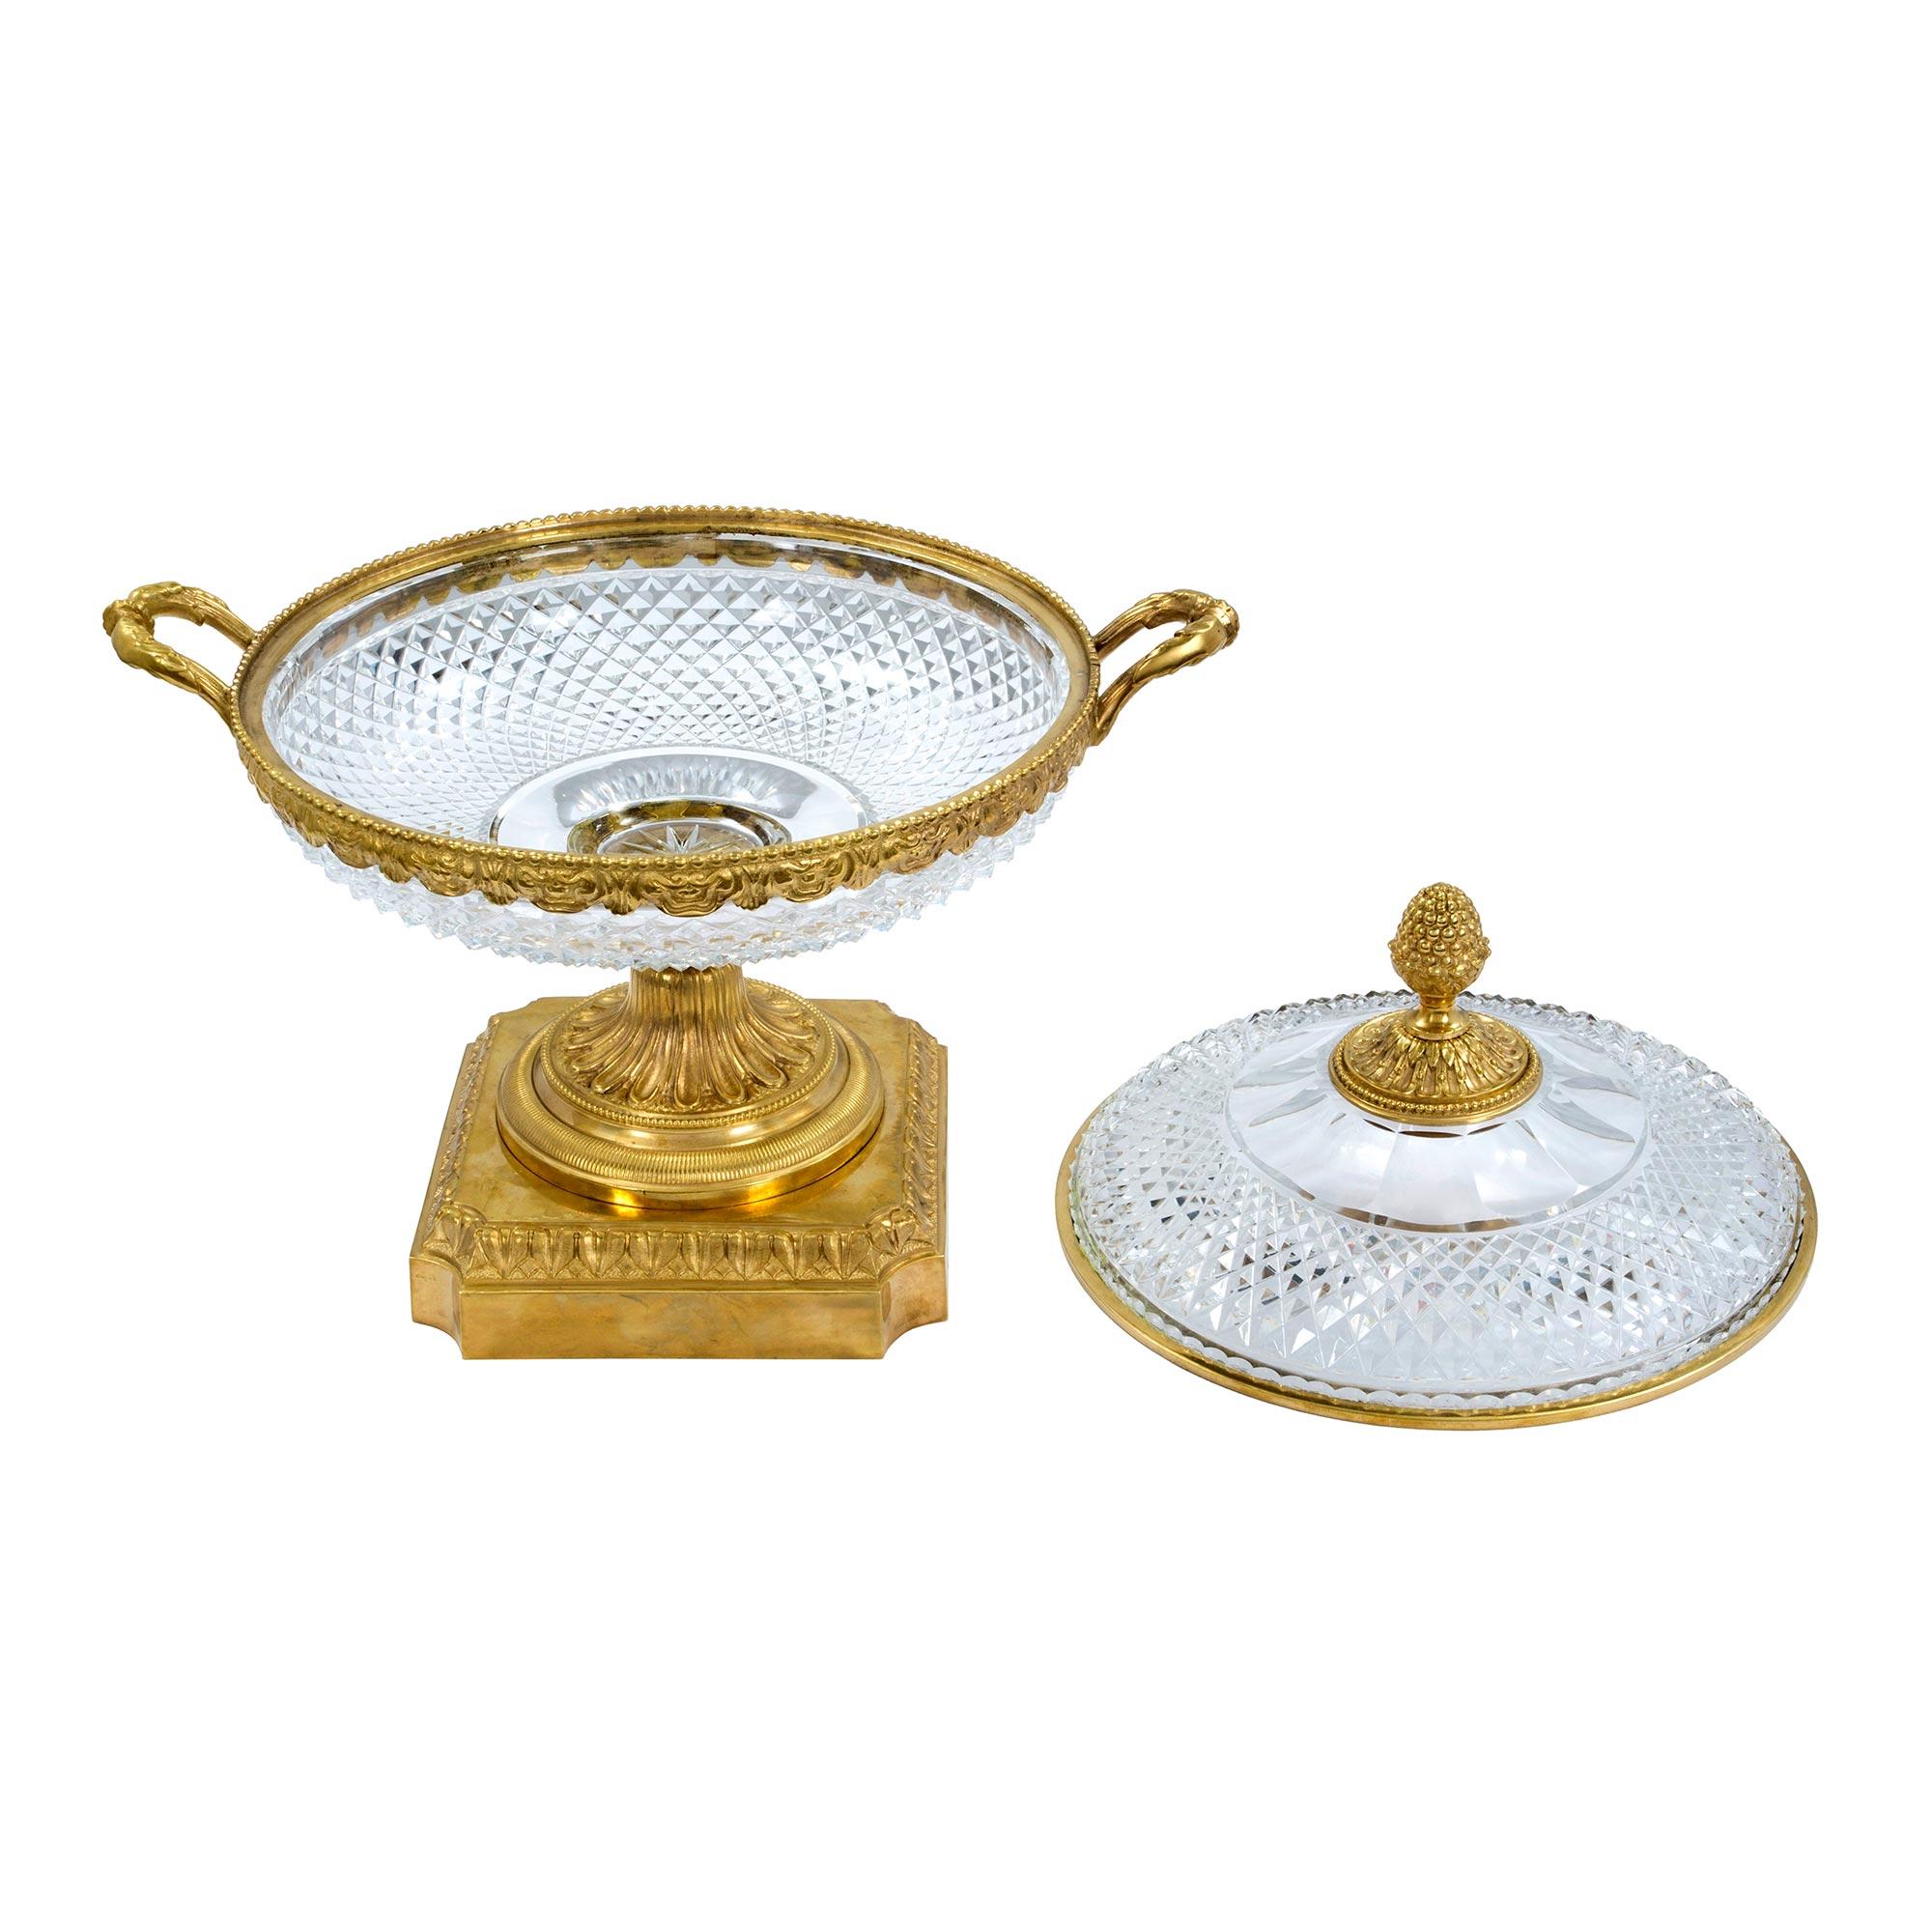 French Mid-19th Century Louis XVI Style Baccarat Crystal and Ormolu Centerpiece For Sale 2